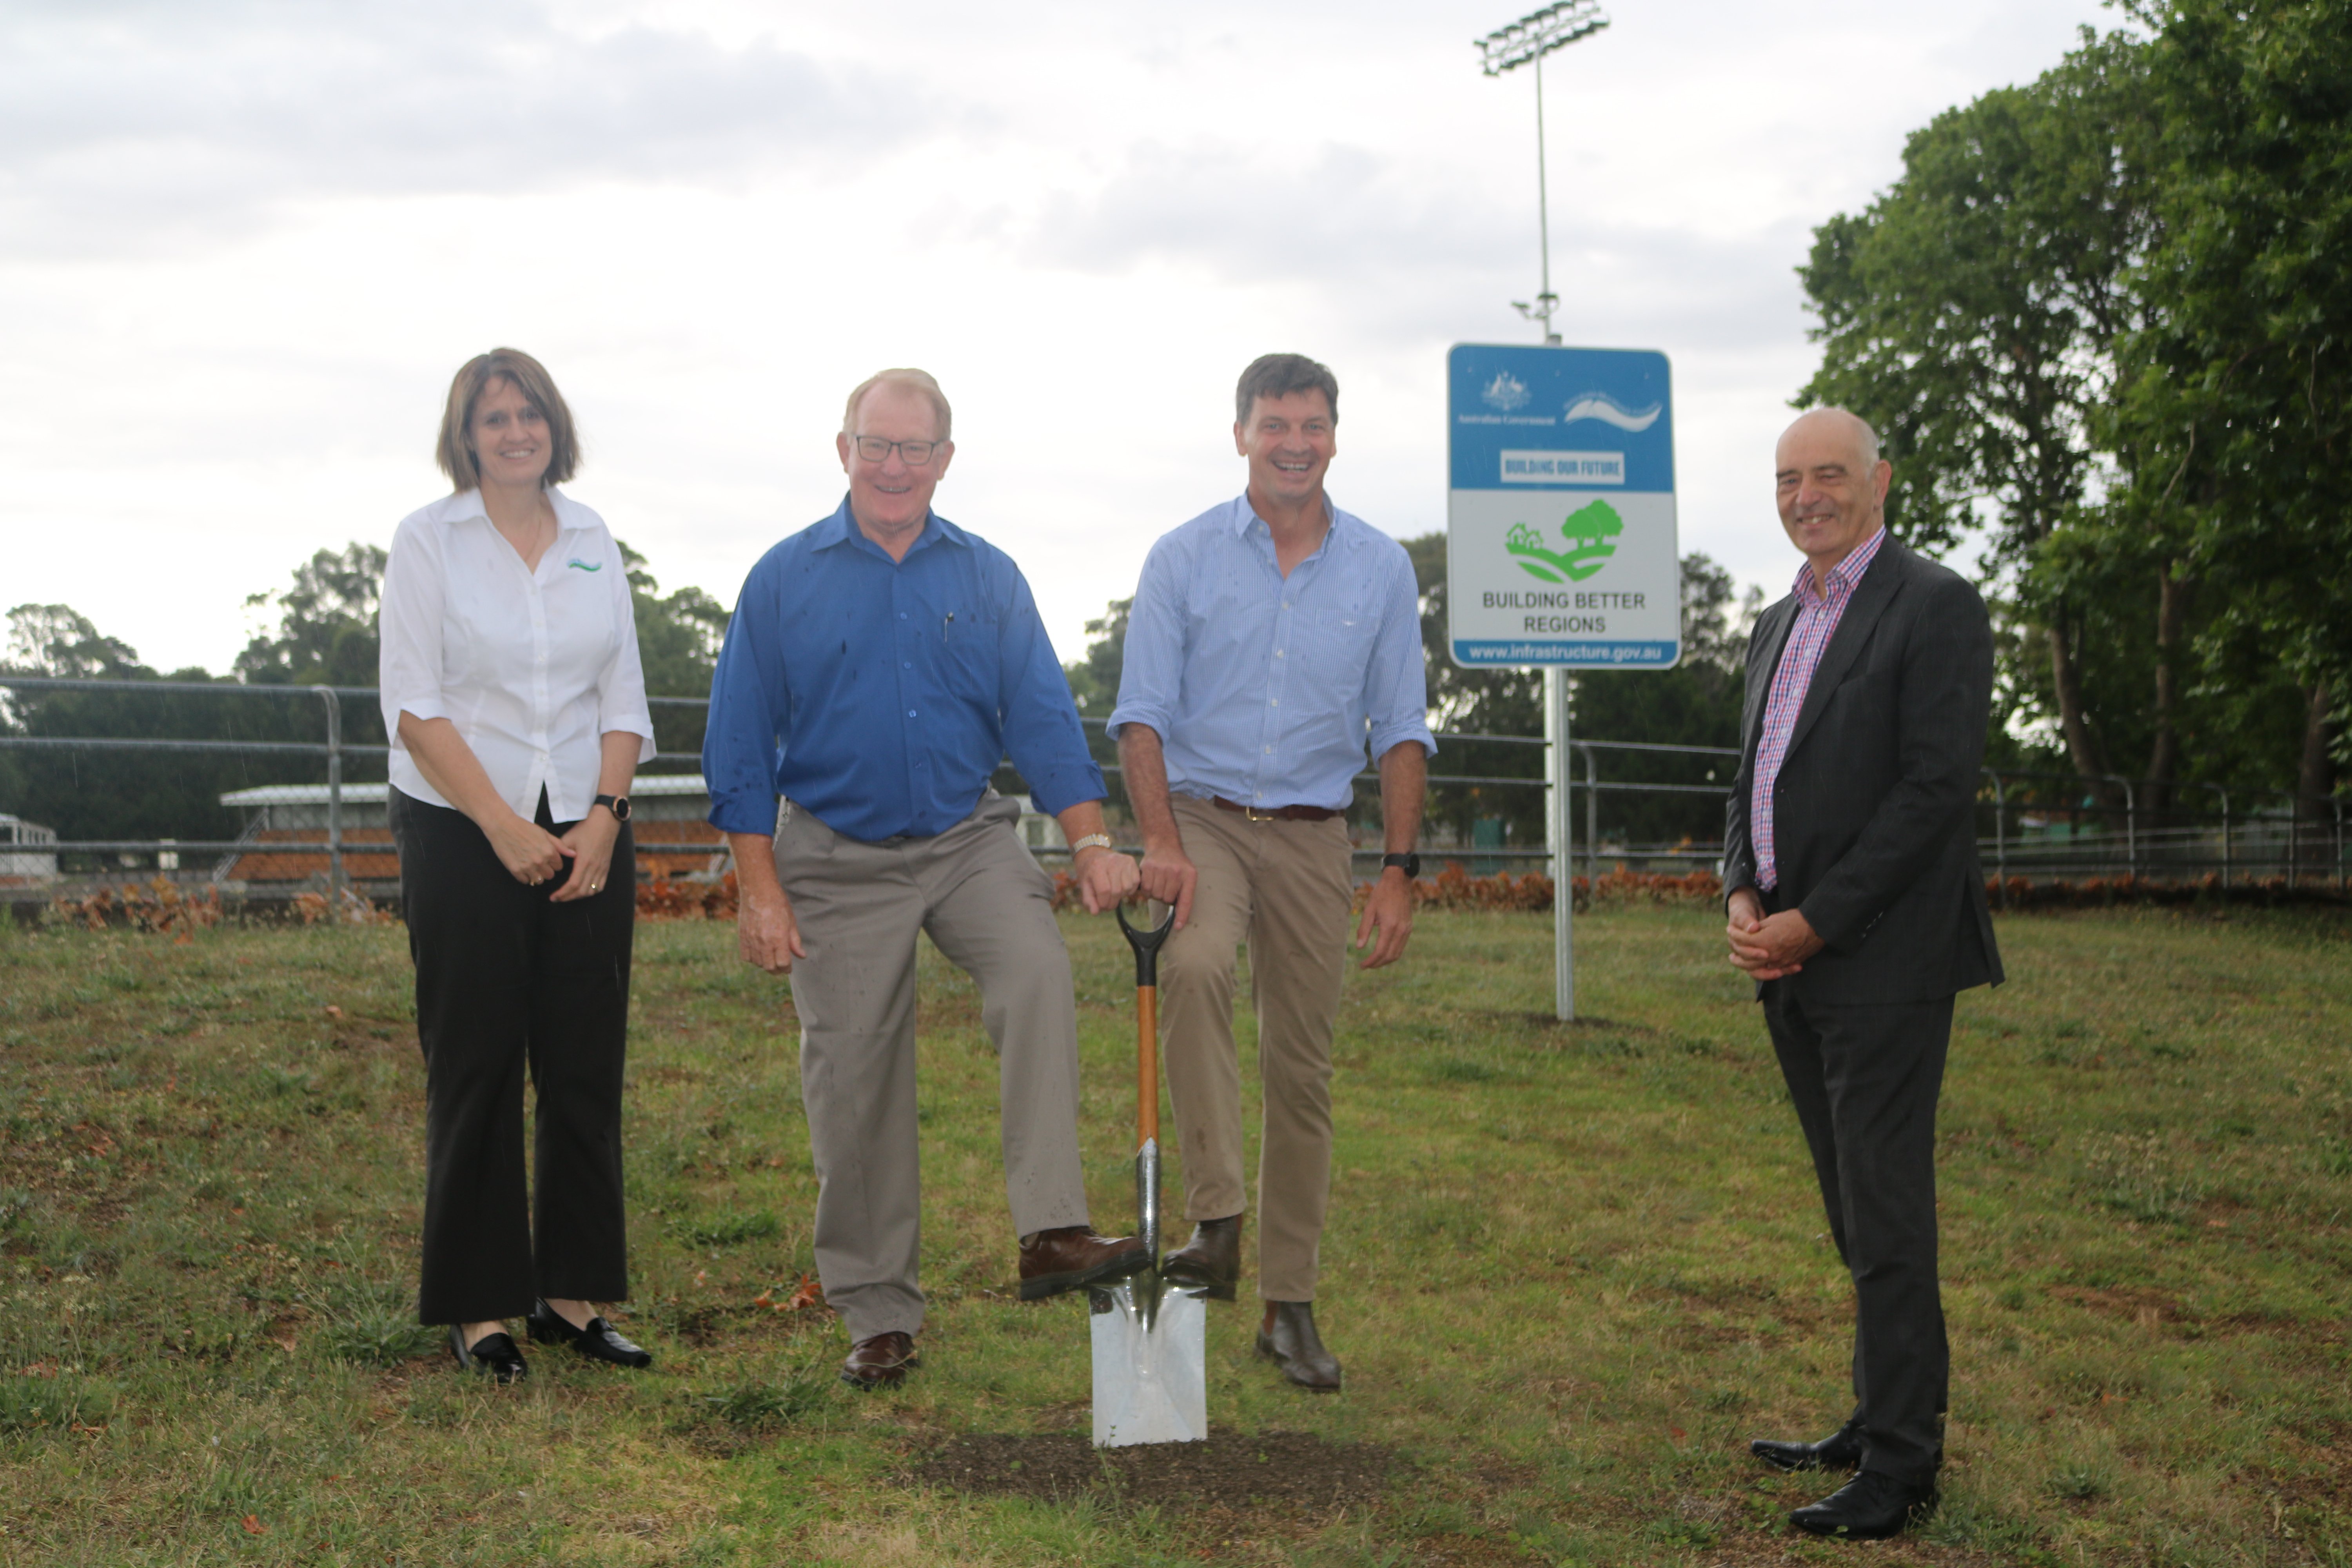 Project to irrigate sporting fields with recycled sewage kicks off